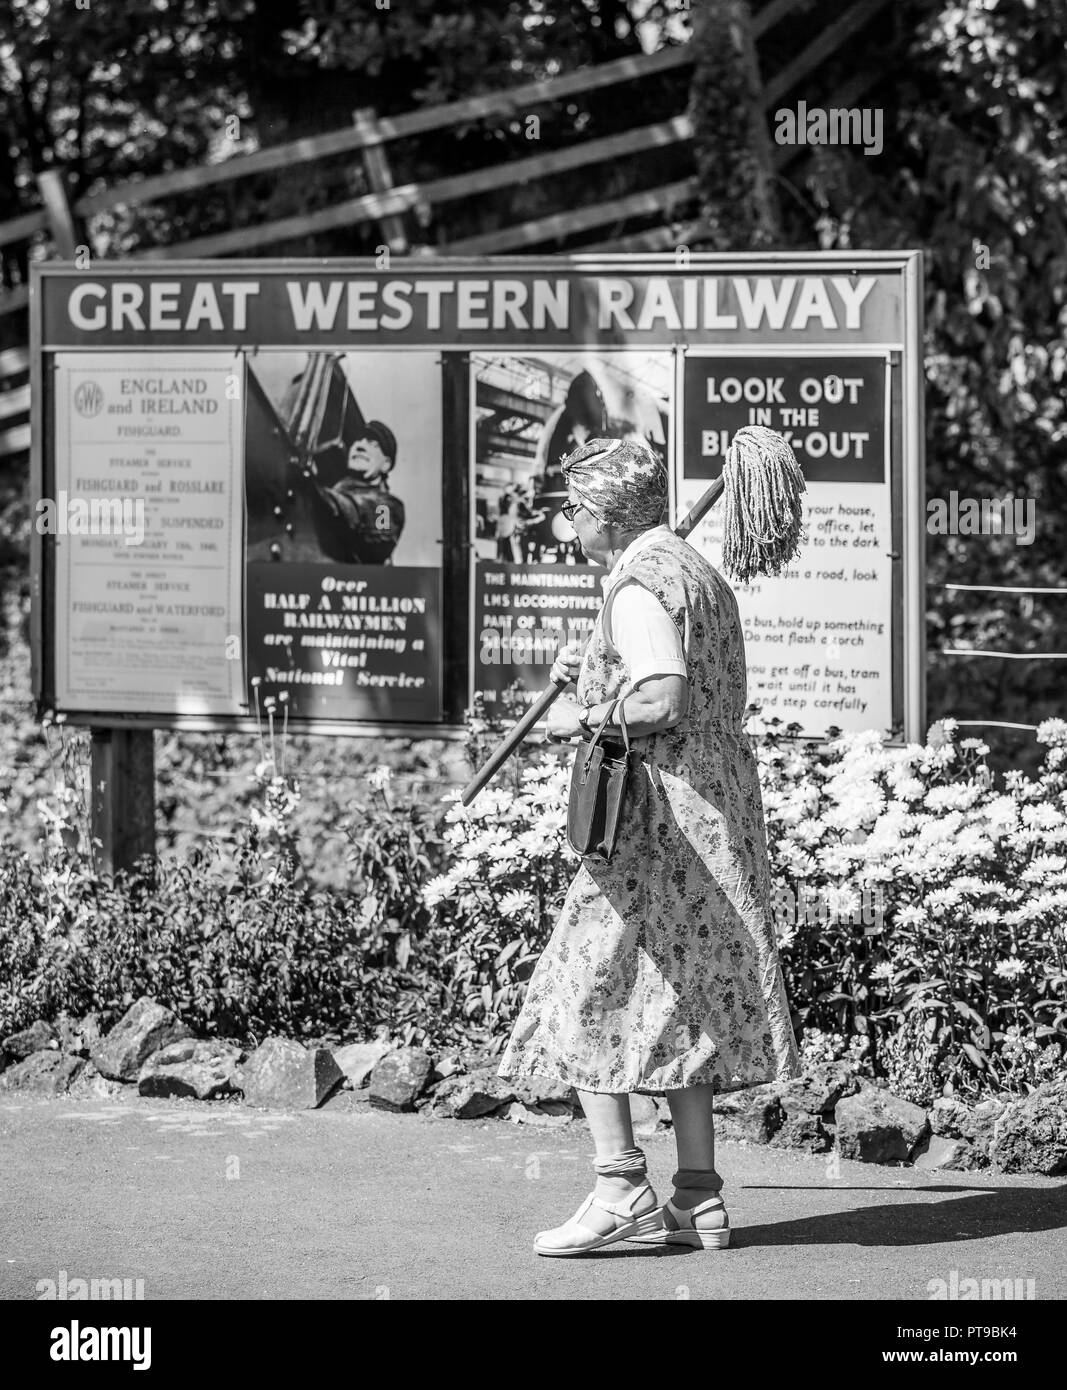 Monochrome rear of woman in overalls, headscarf, wrinkled stockings as vintage cleaning lady with mop at heritage railway station, UK 1940s WWII event. Stock Photo